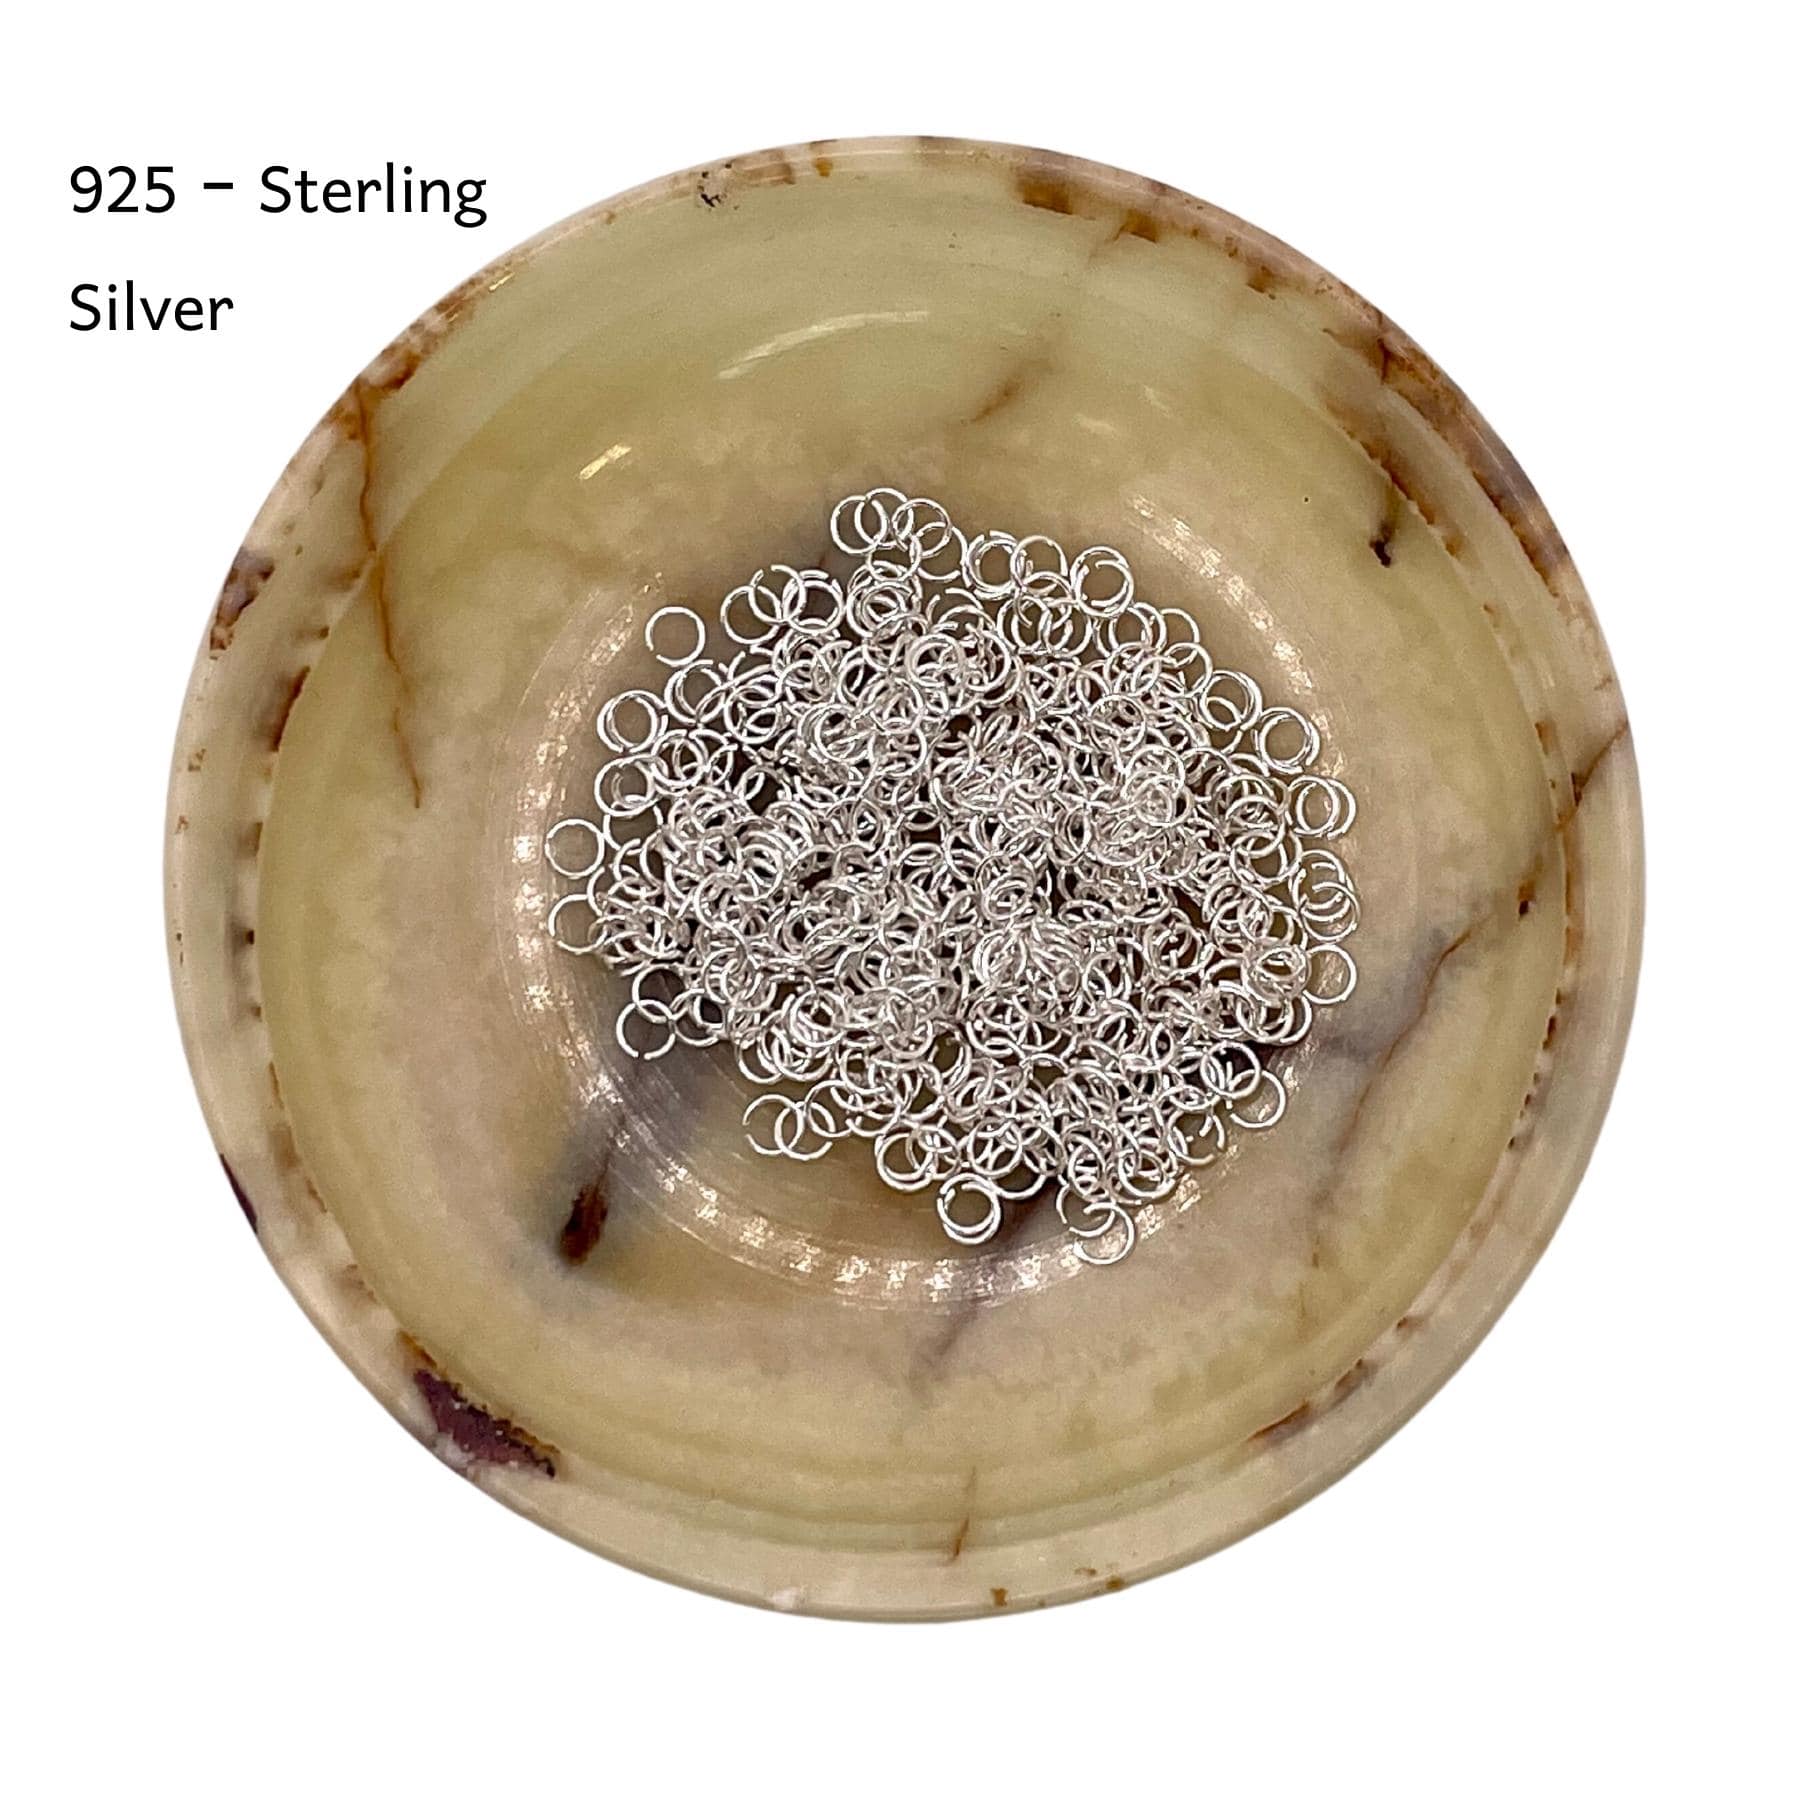 Bulk 925 Sterling Silver Jump Rings in a plate.